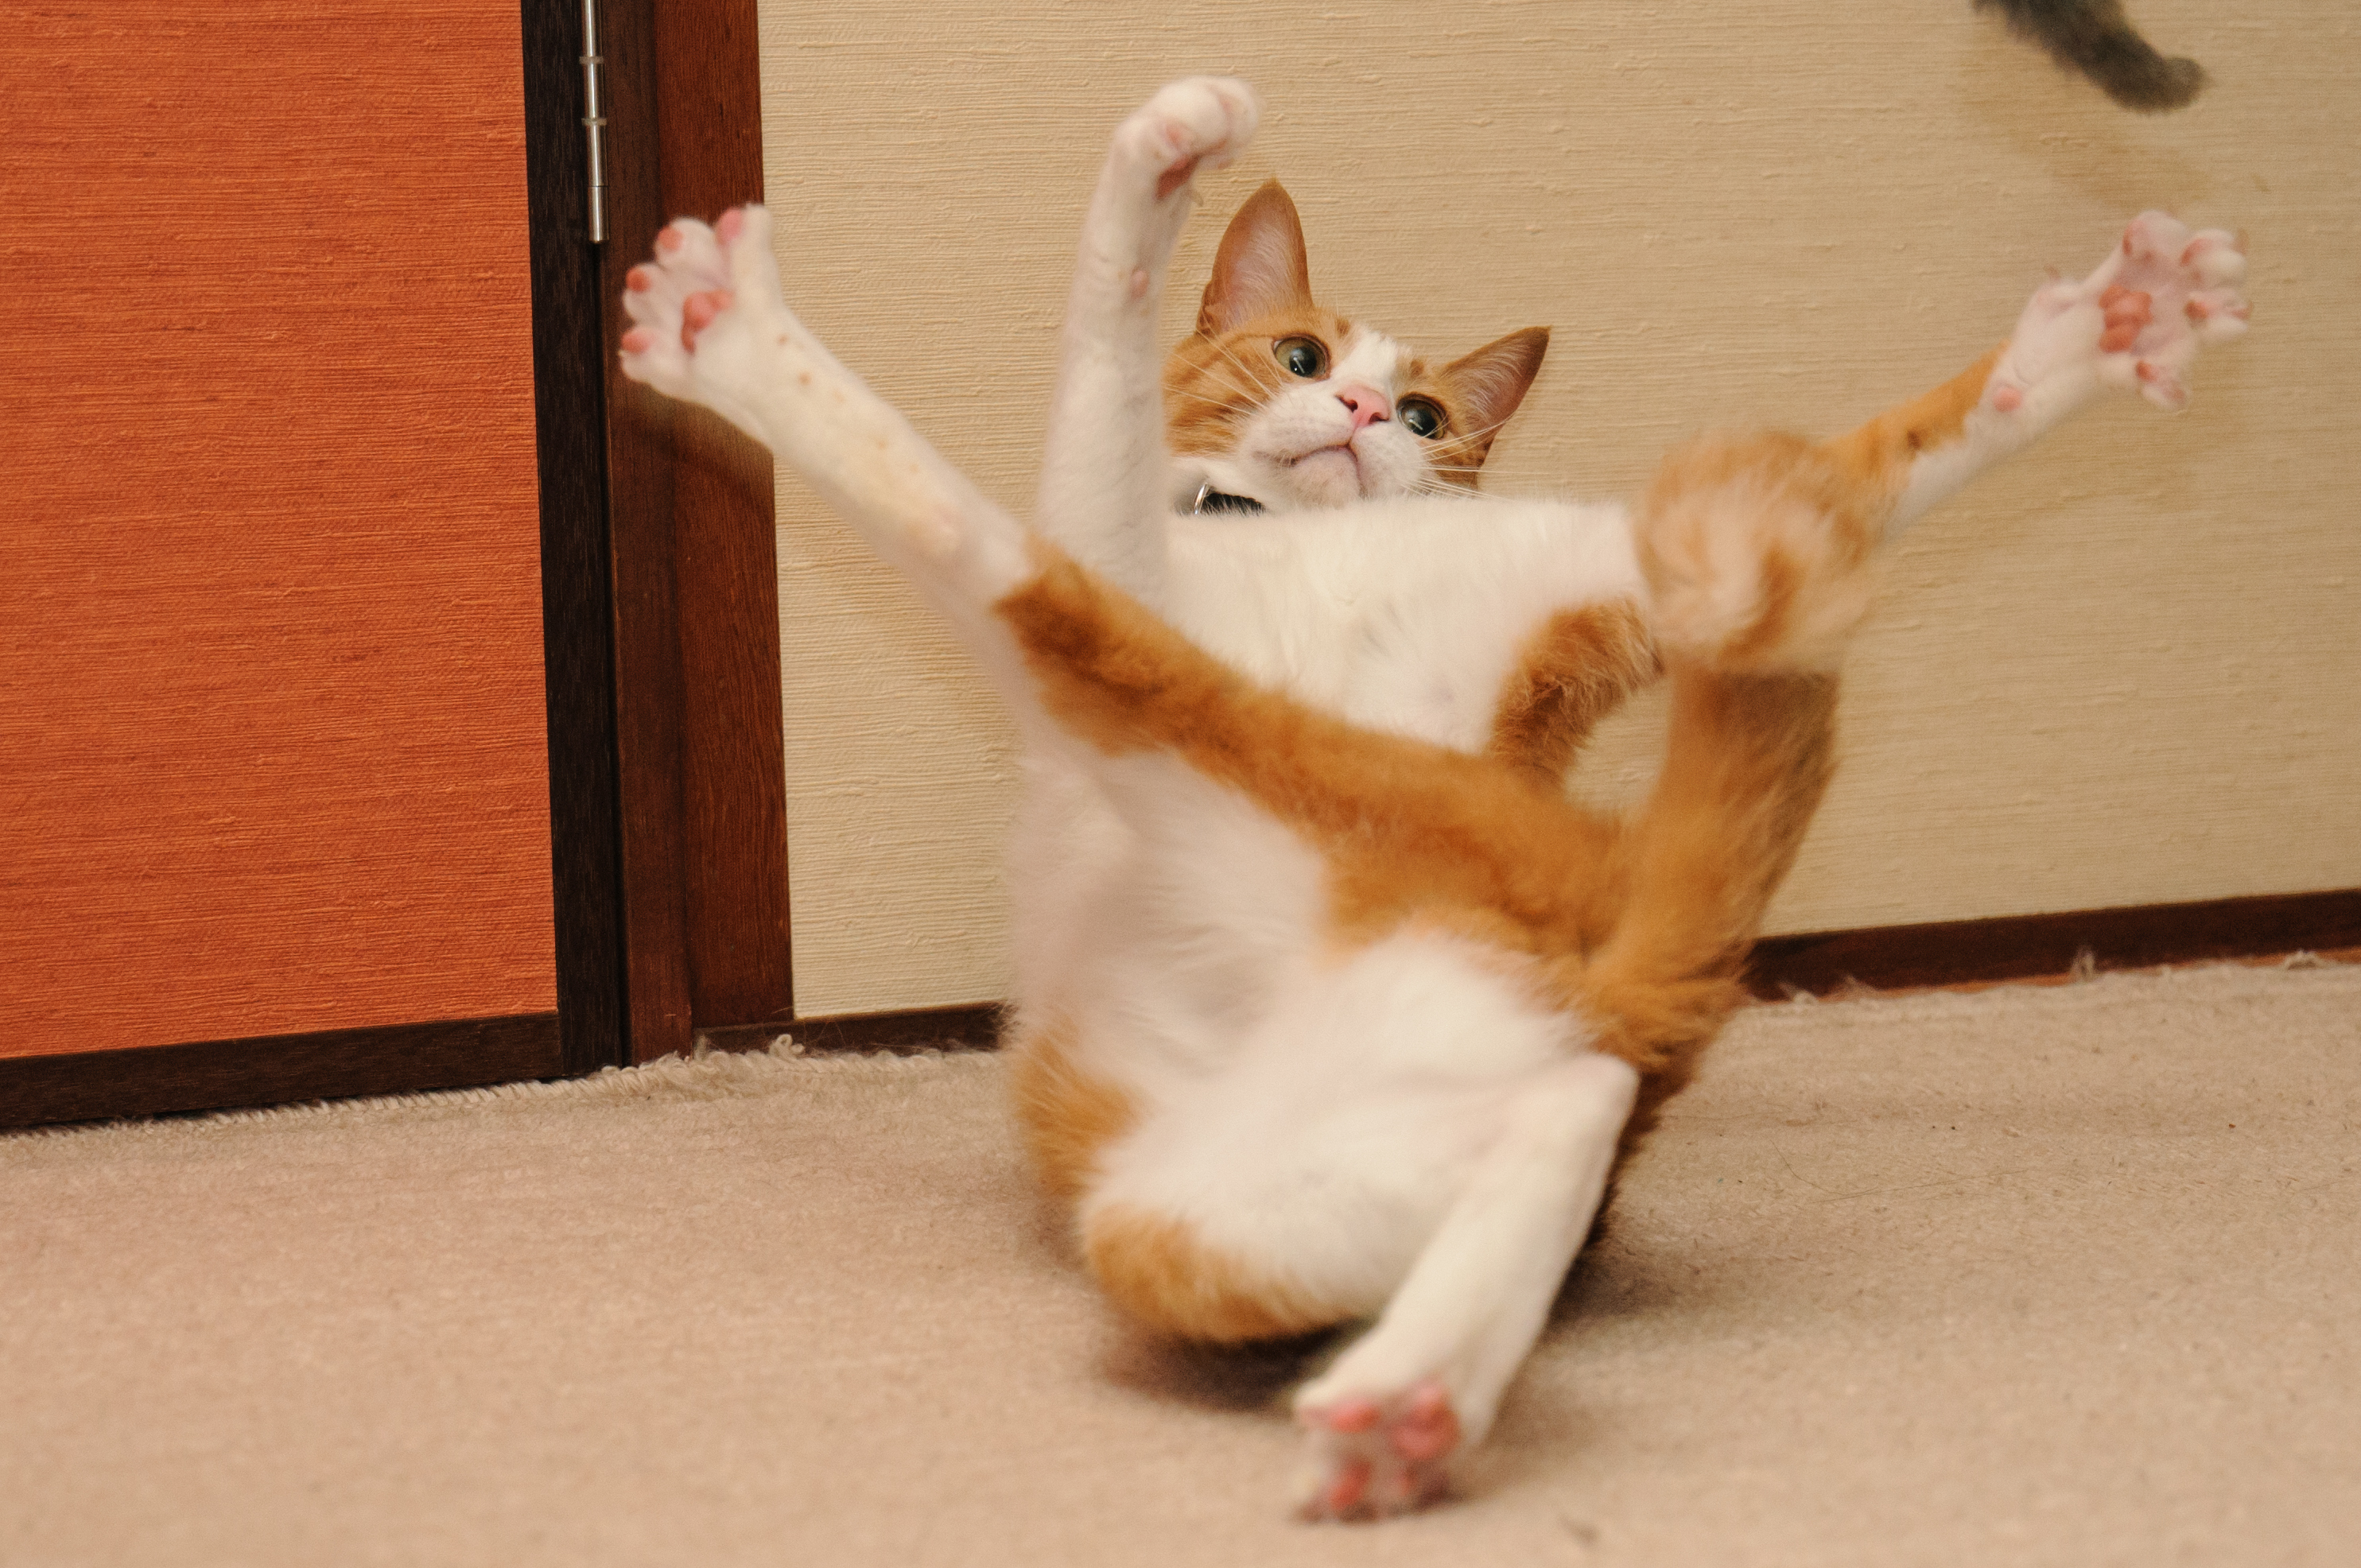 Cat caught mid-air with paws outstretched